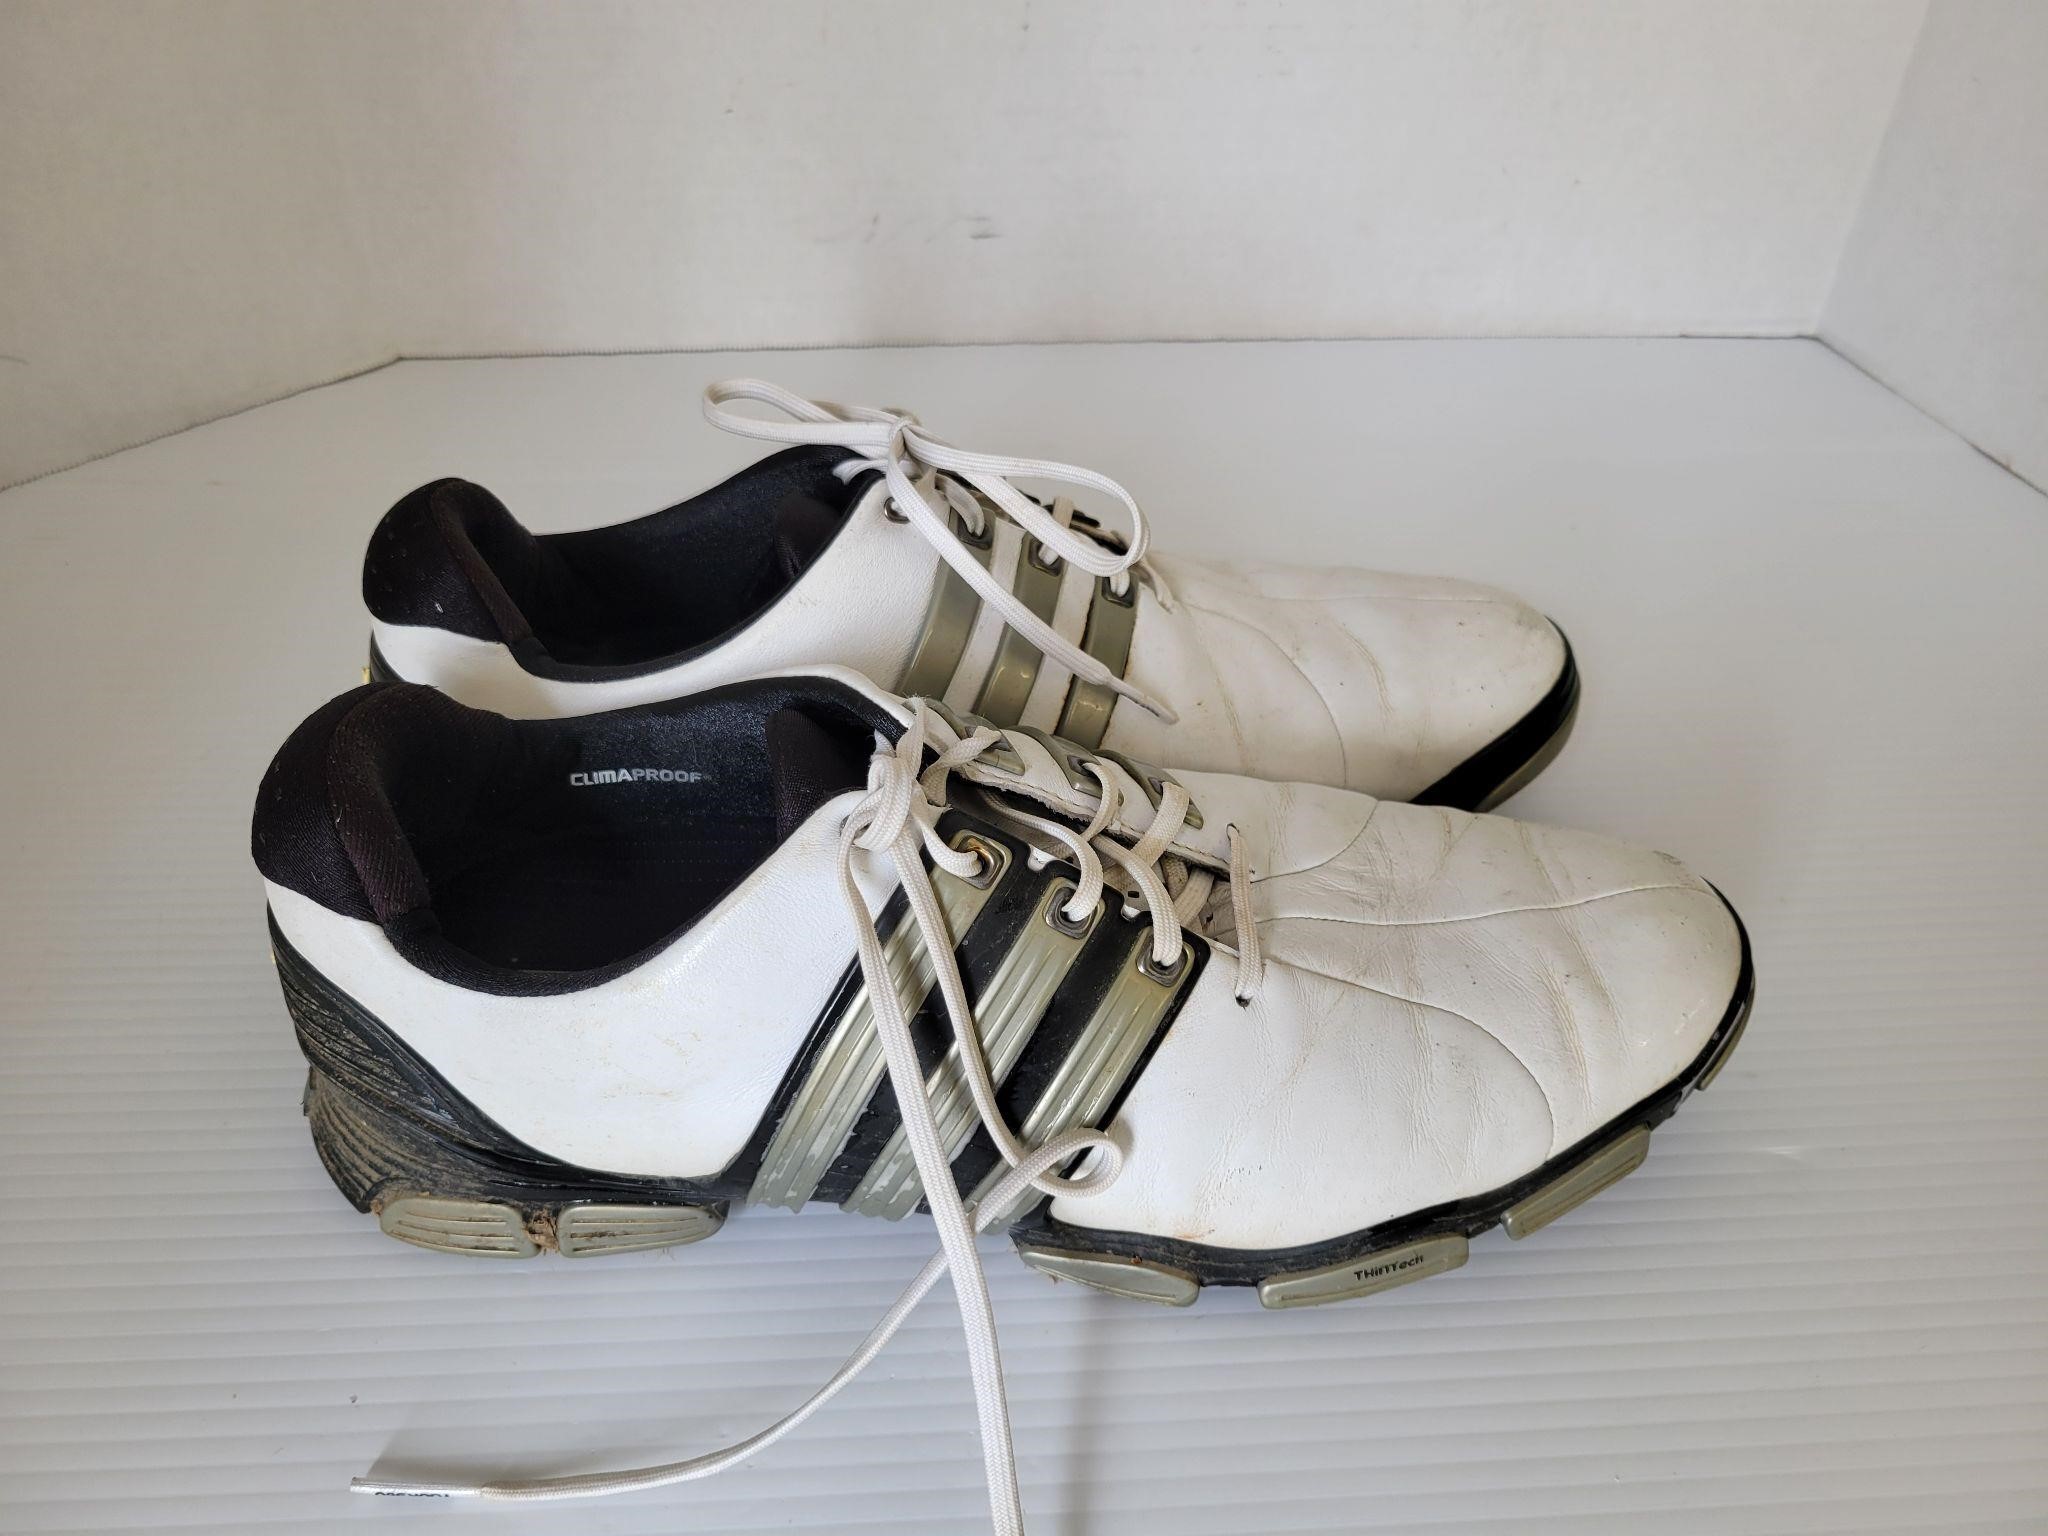 Adidas mens size 11 golf shoes